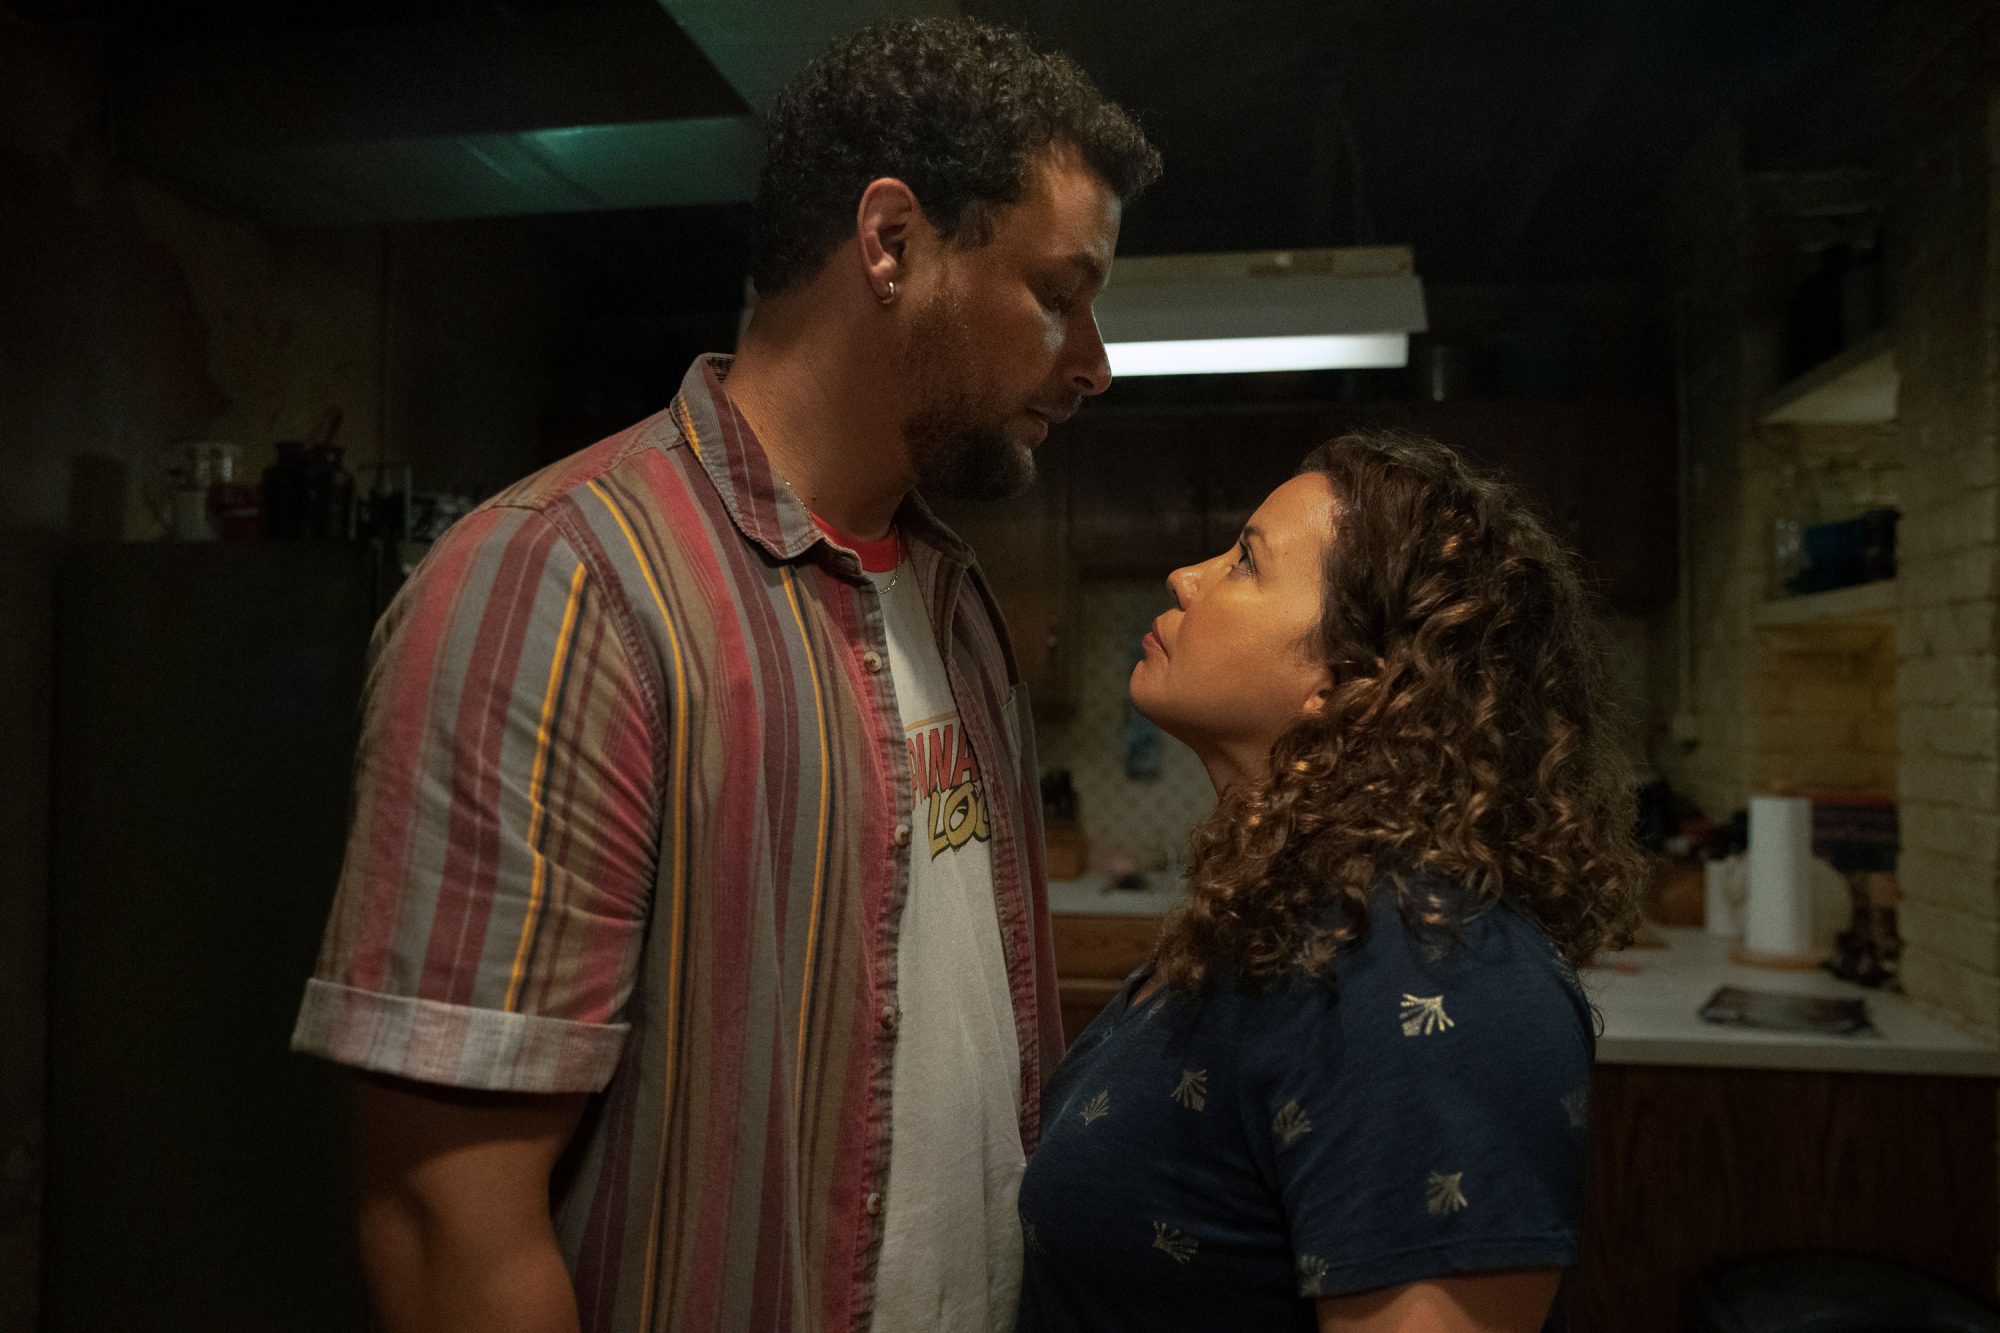 The Horror of Dolores Roach - First Look. Pictured (L-R): Alejandro Hernandez (Luis) and Justina Machado (Dolores Roach)